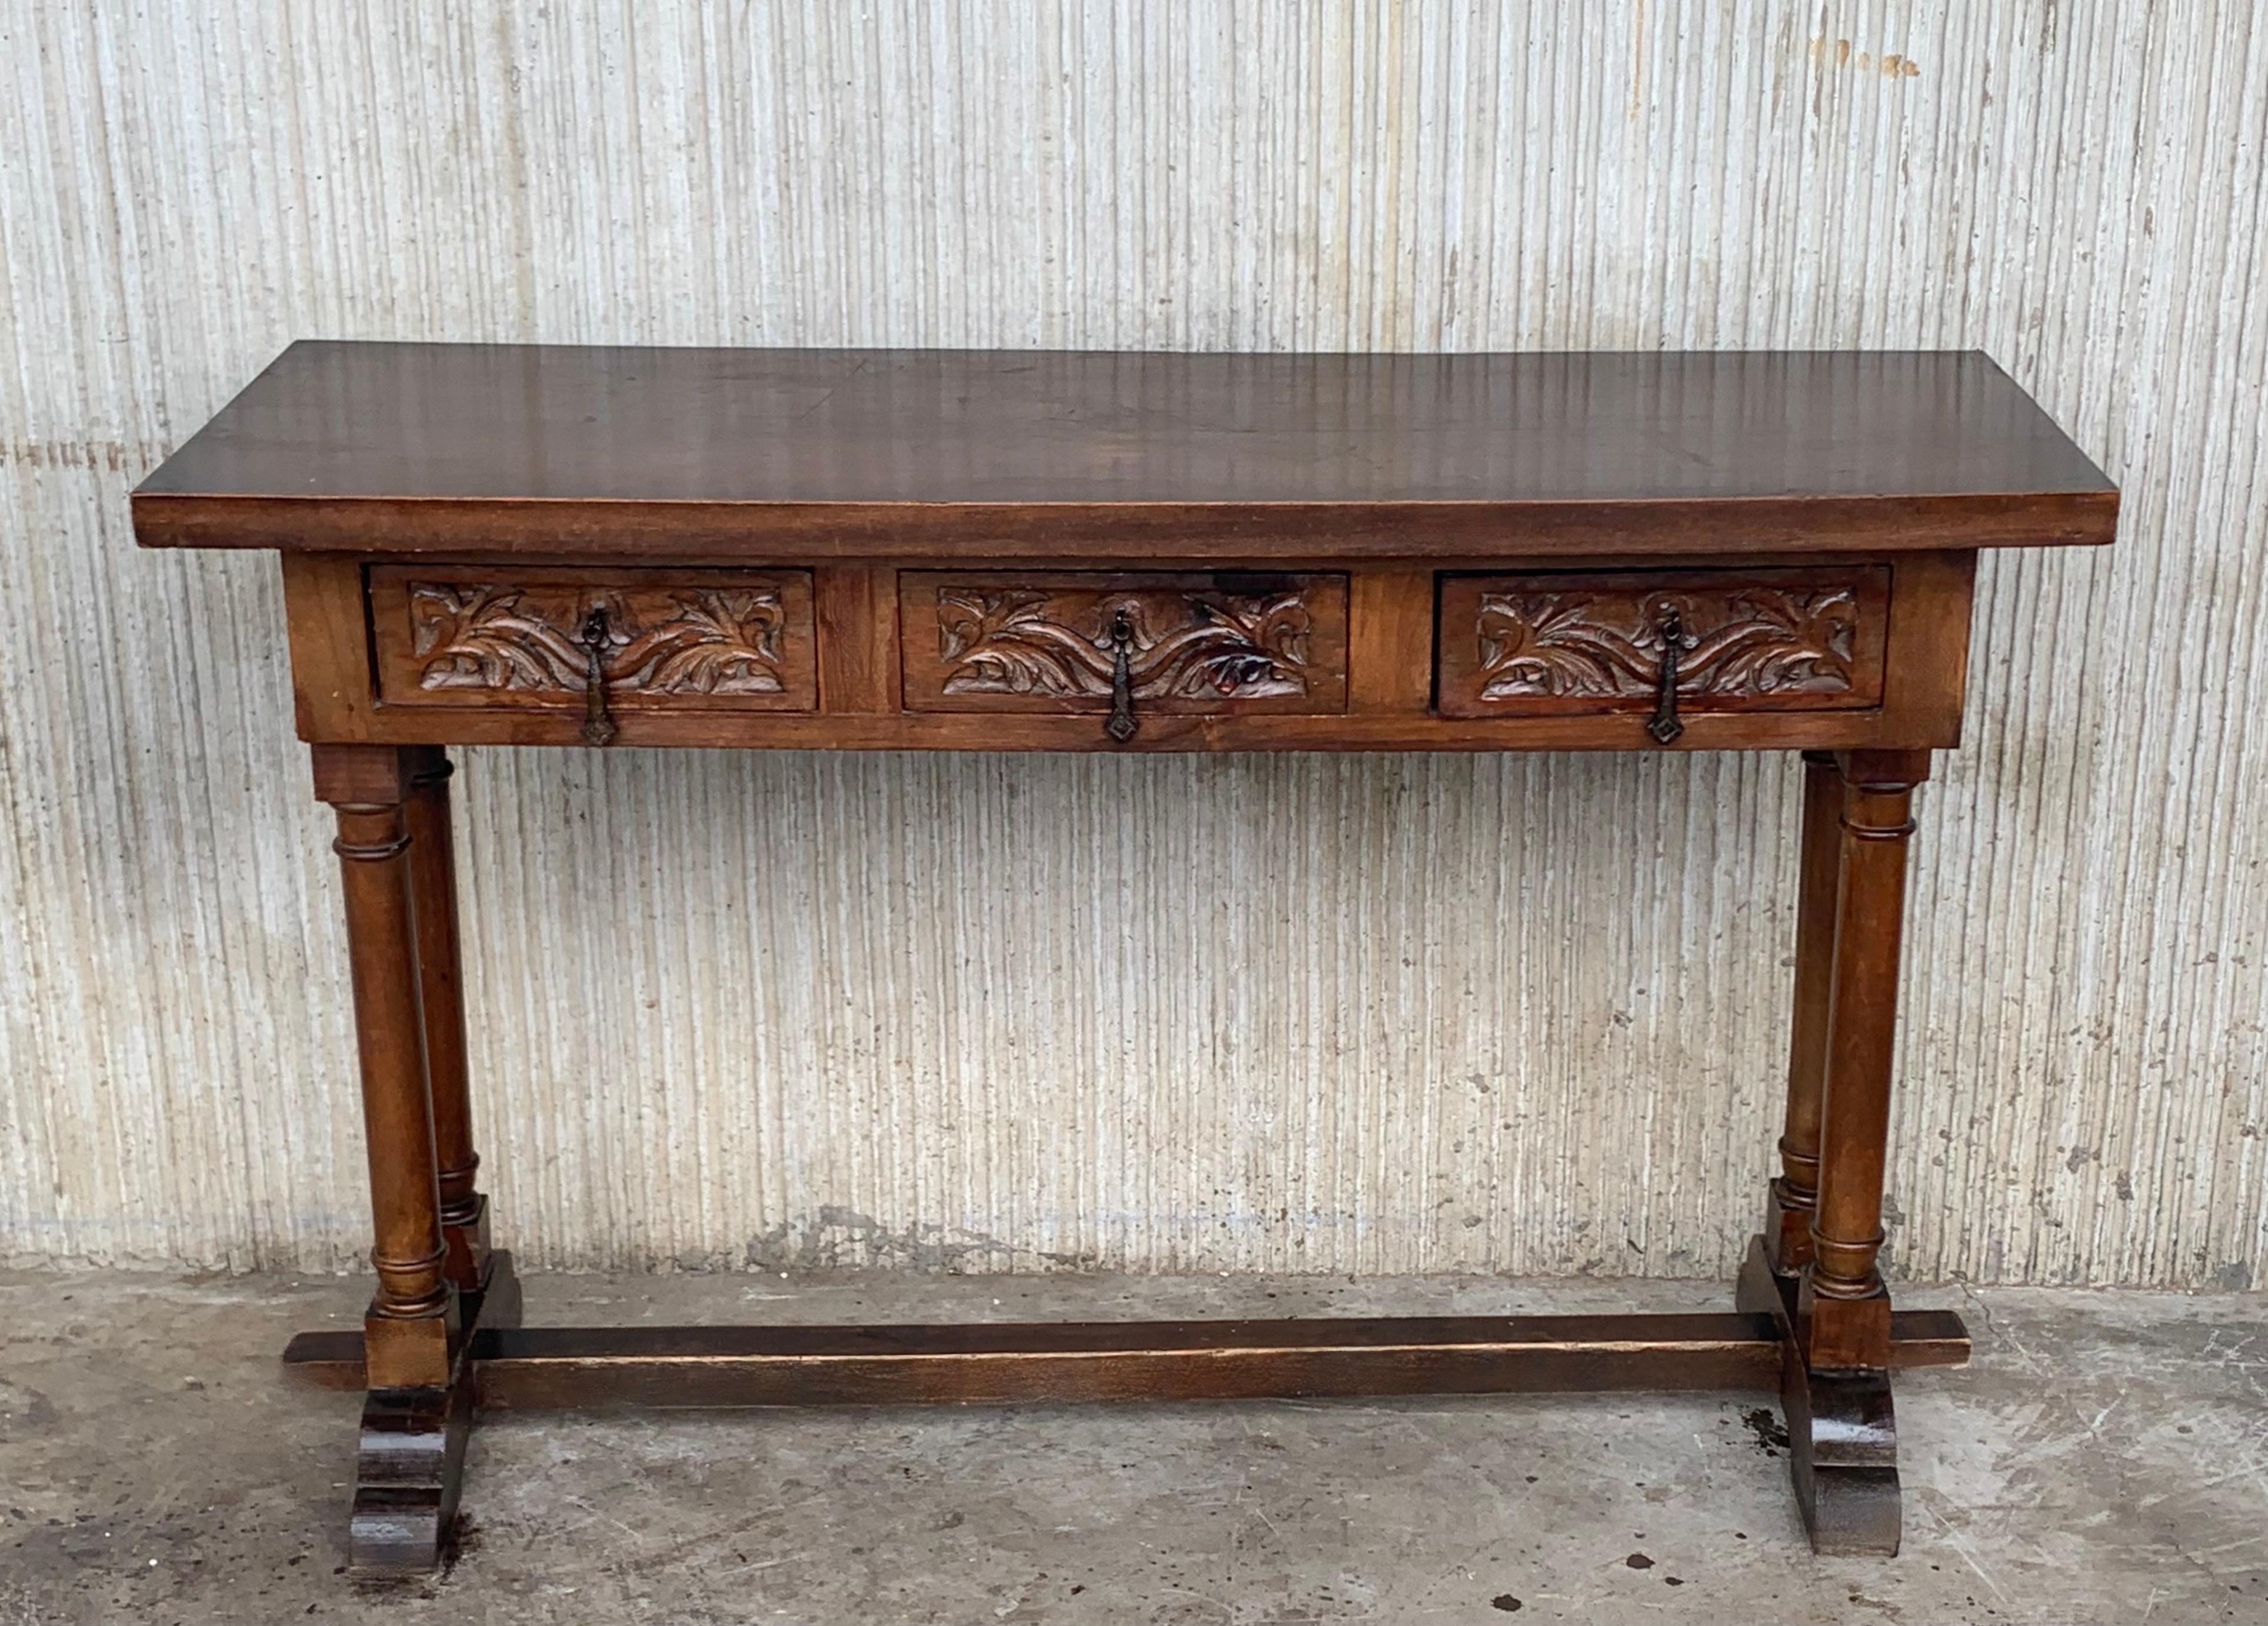 19th century Spanish Baroque console table in walnut with three carved drawers and wood stretcher.